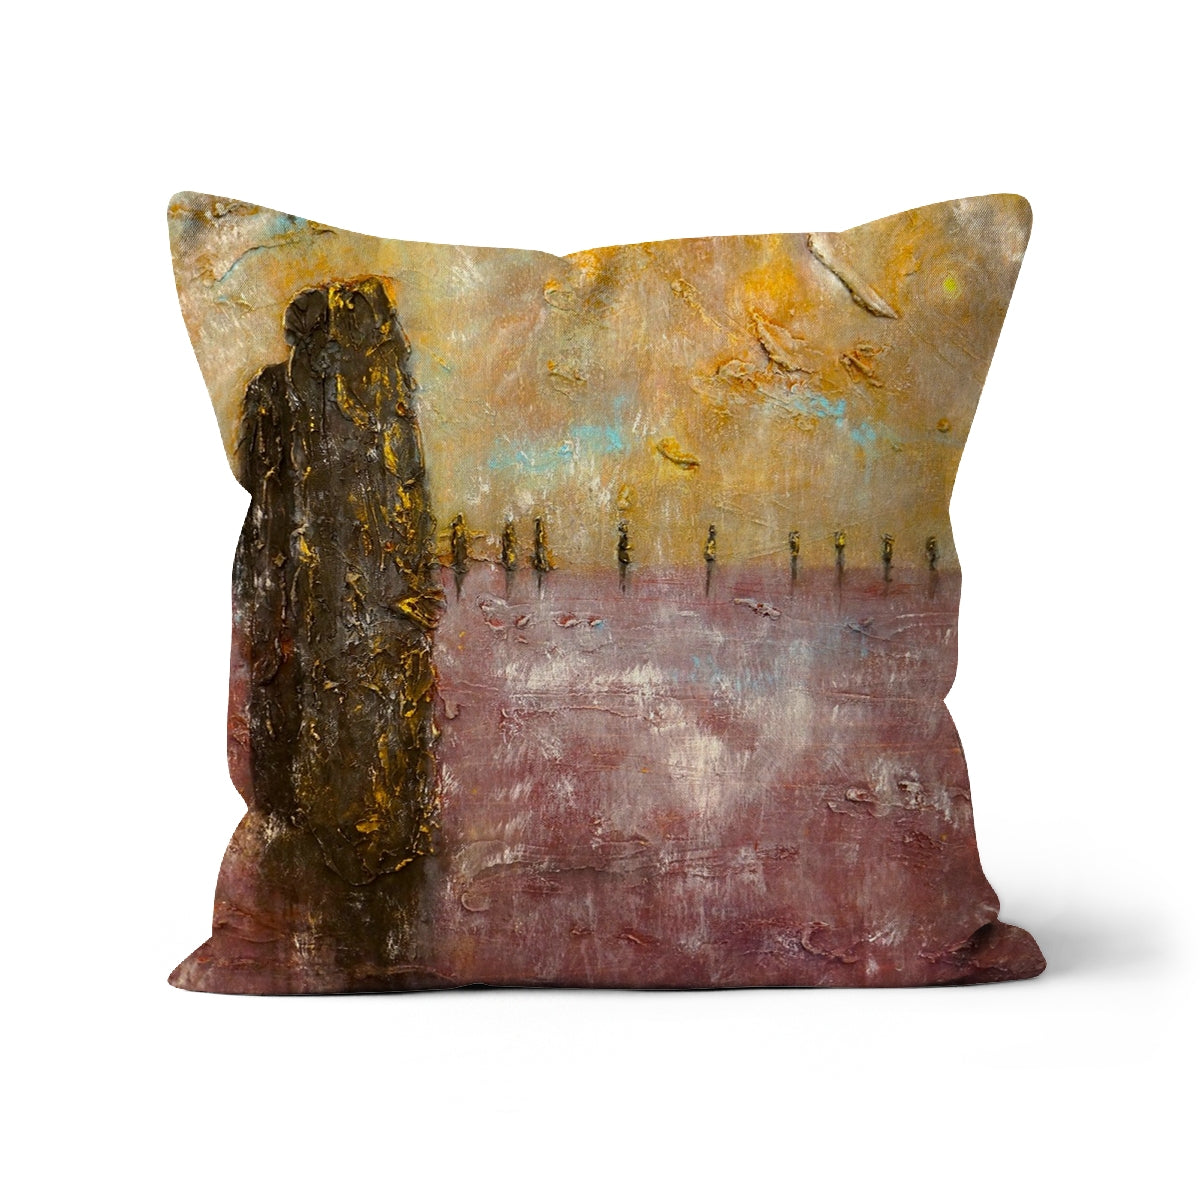 Brodgar Mist Orkney Art Gifts Cushion-Cushions-Orkney Art Gallery-Faux Suede-12"x12"-Paintings, Prints, Homeware, Art Gifts From Scotland By Scottish Artist Kevin Hunter